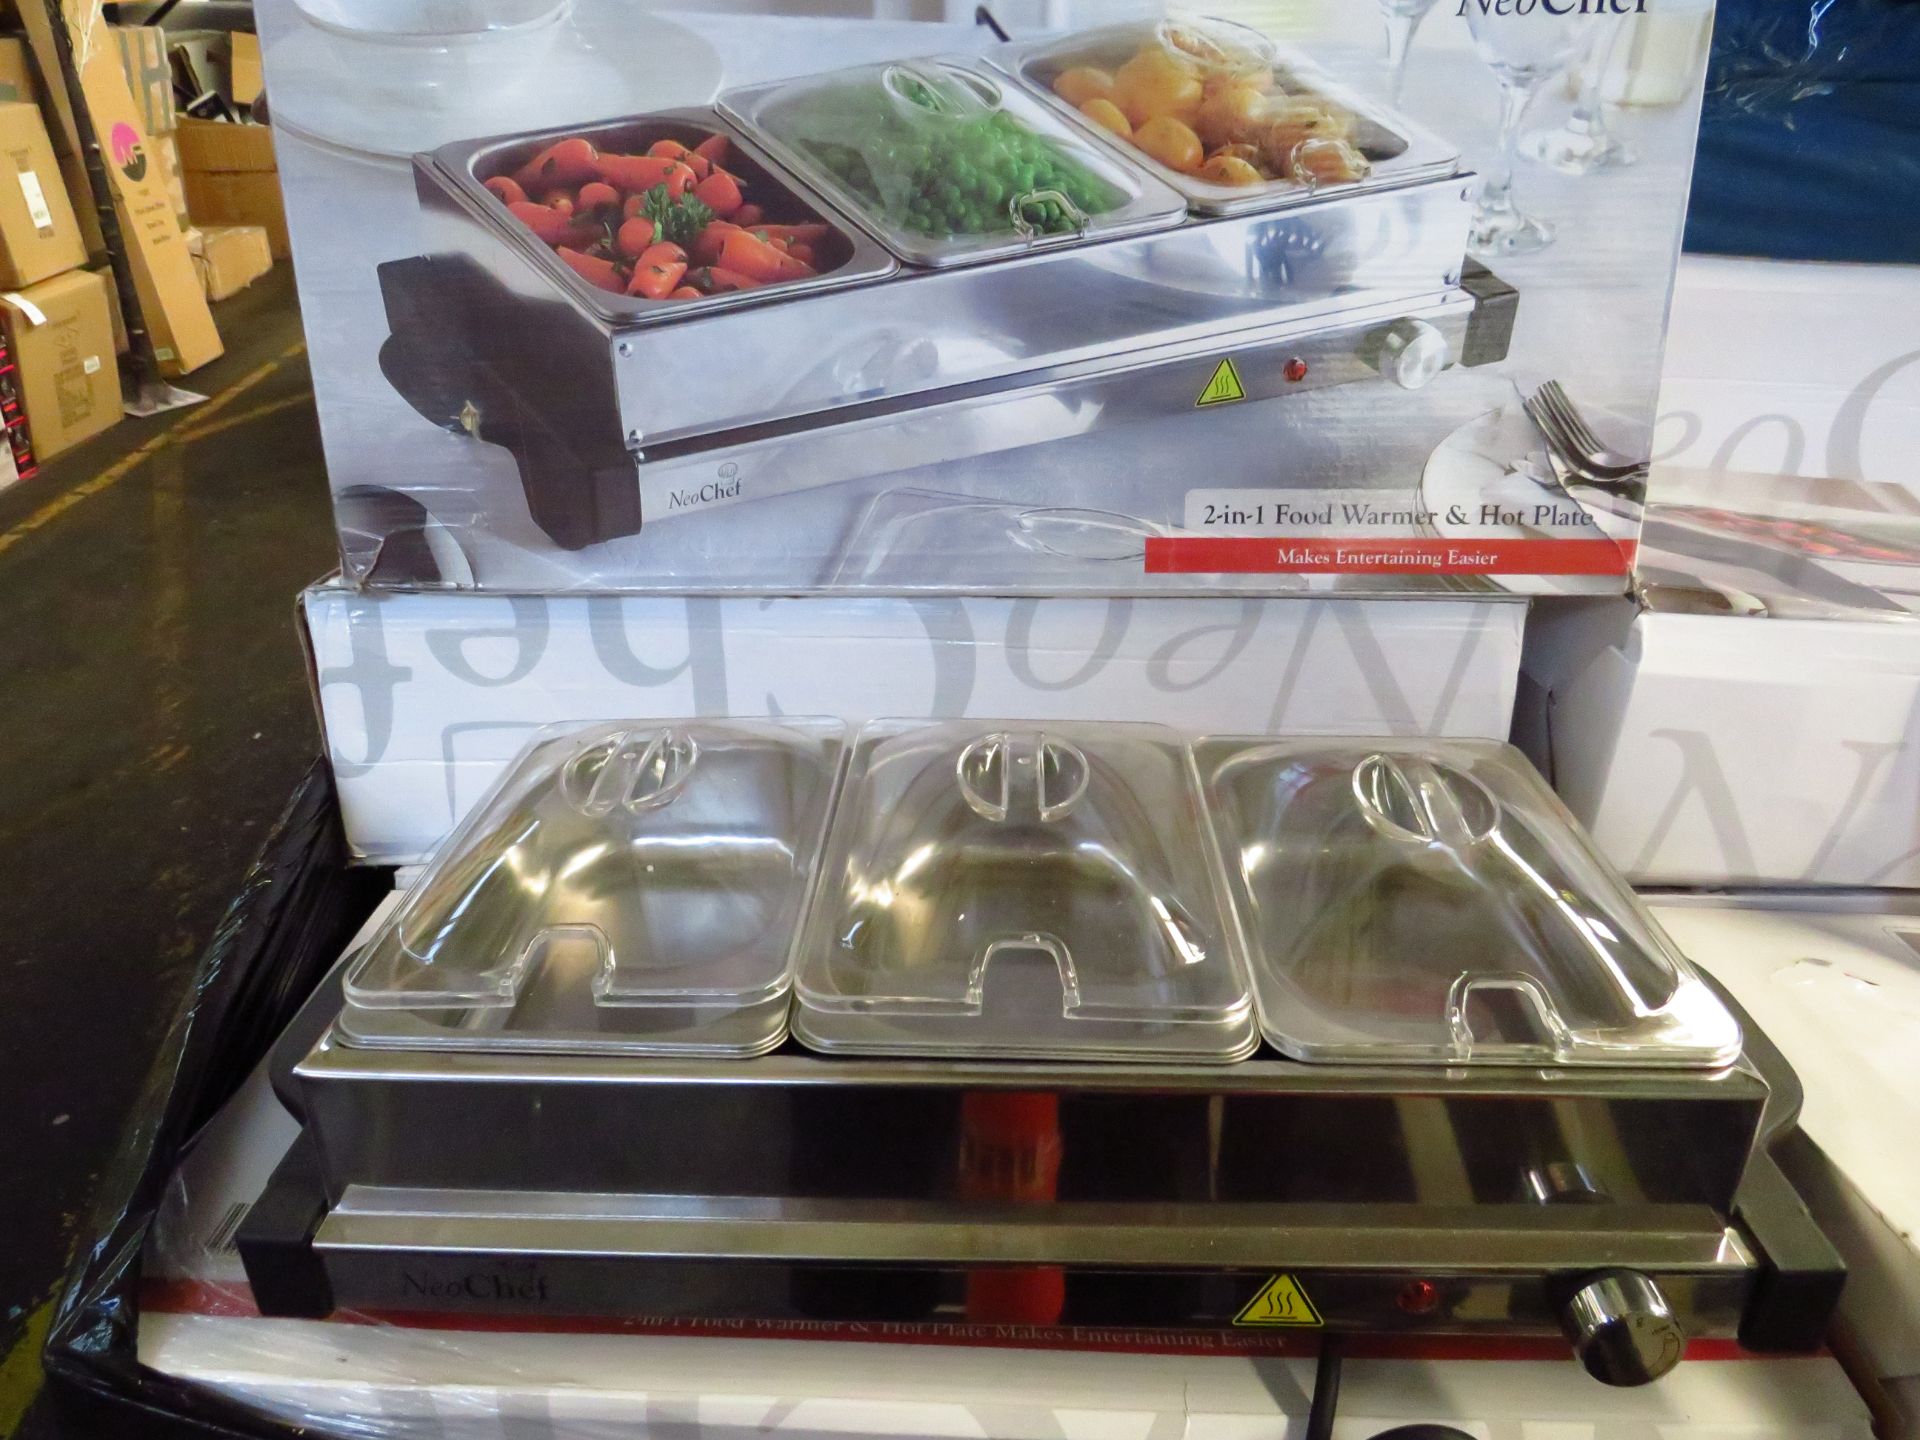 Scotts of Stow Compact Buffet Warmer RRP œ49.95 - This product has been graded in B condition, it is